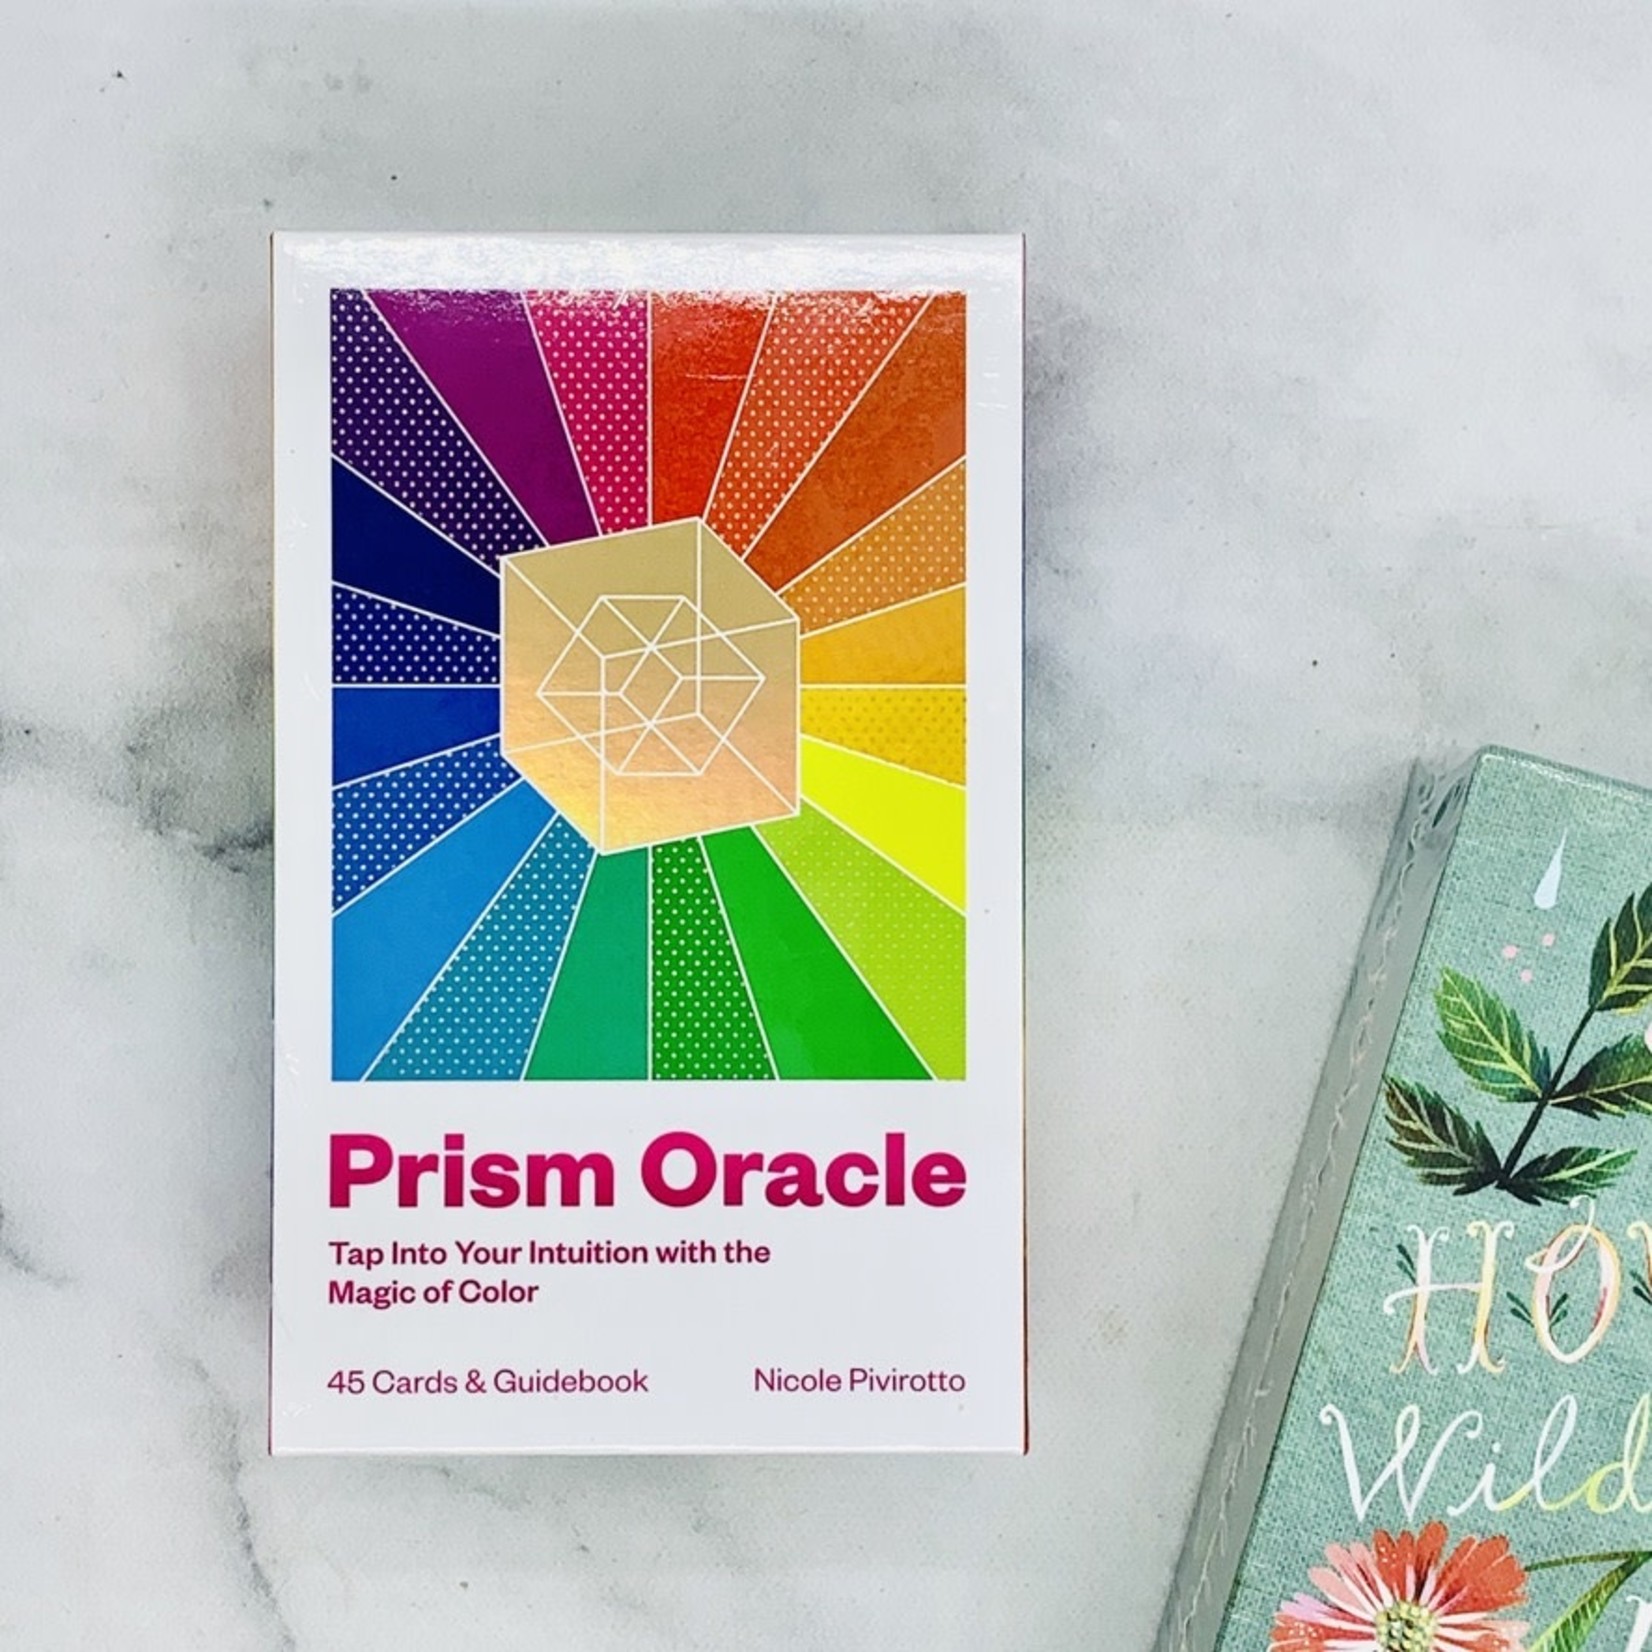 Prism Oracle Tap into Your Intuition with the Magic of Color